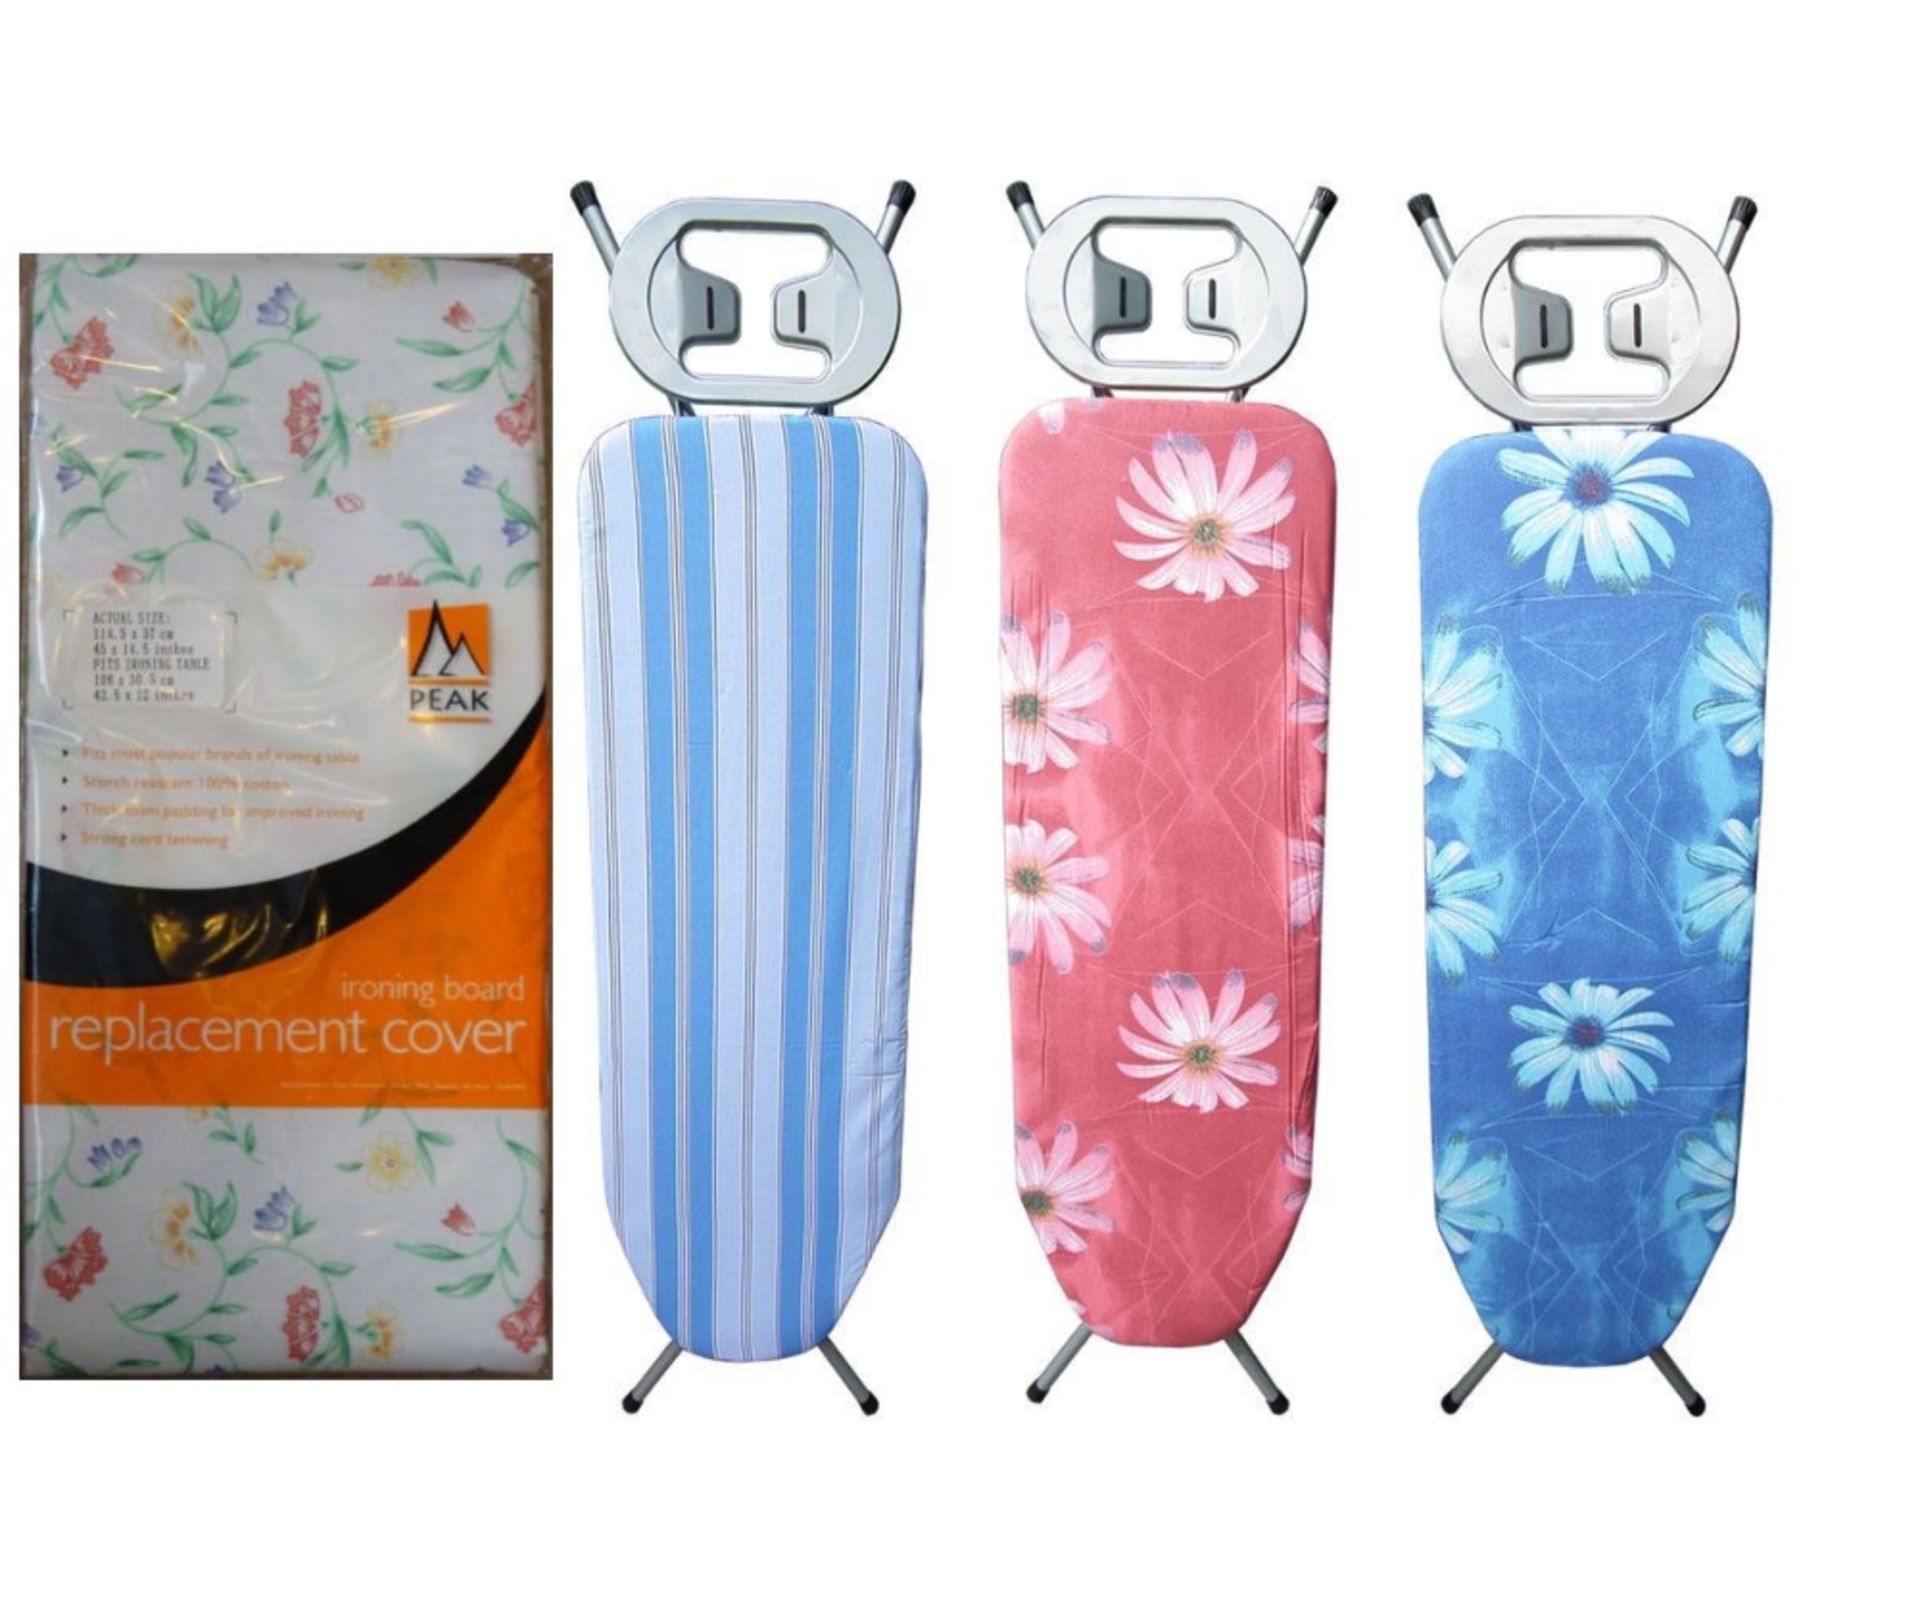 80 x Peak Ironing Board Covers – 1 Styles – NO VATUK Delivery £20